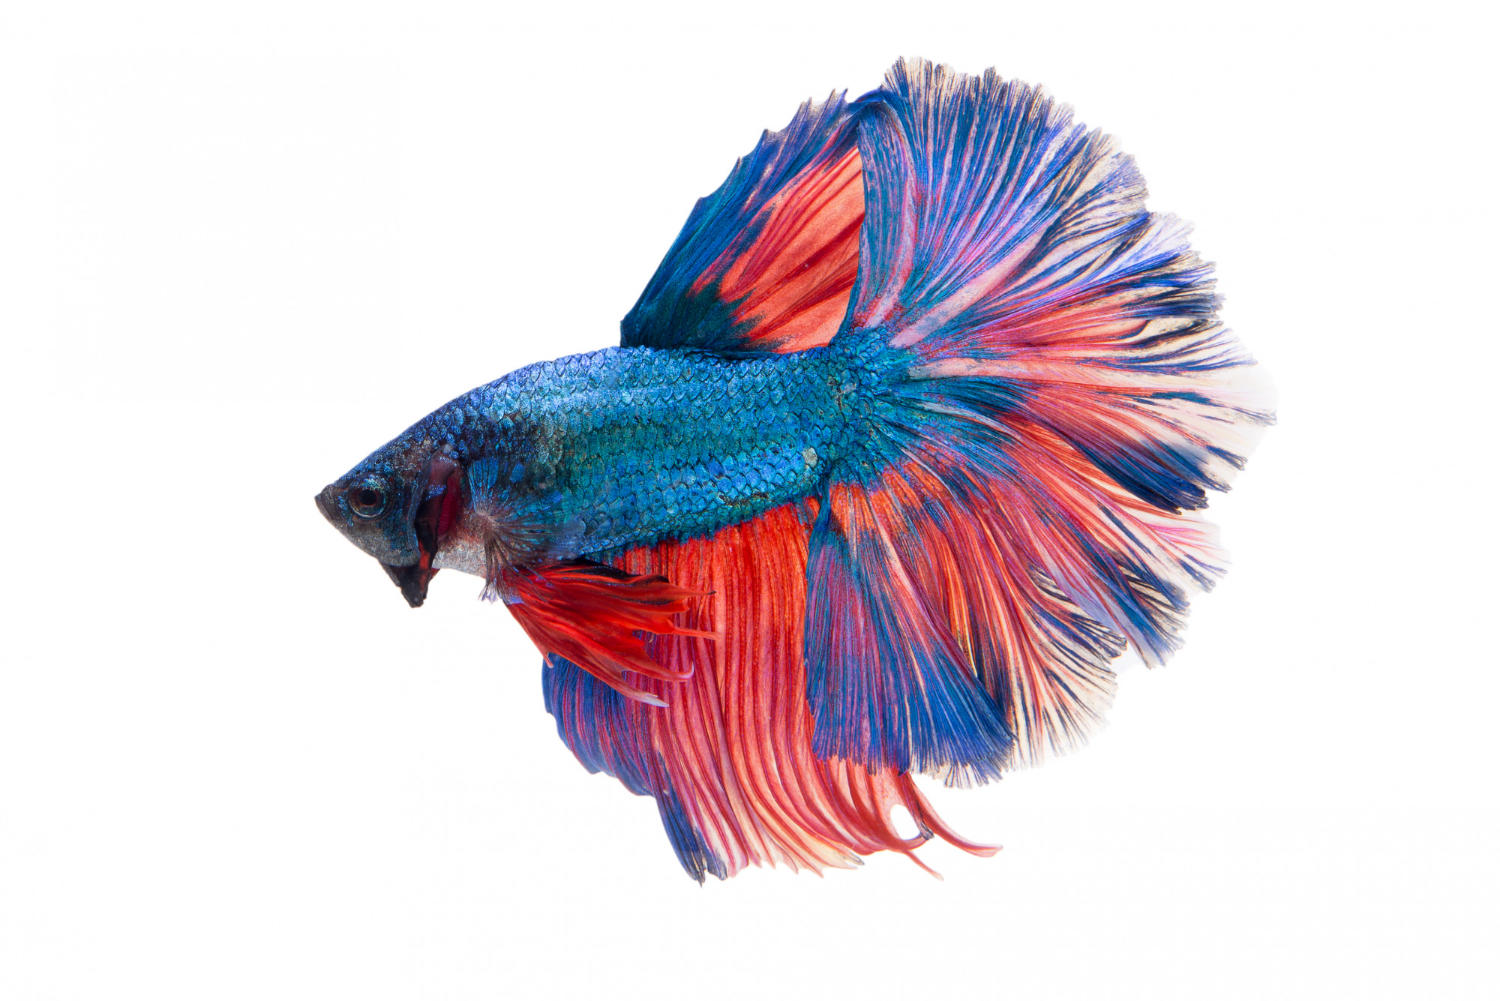 Signs of Illness in Betta Fish: What to Look For